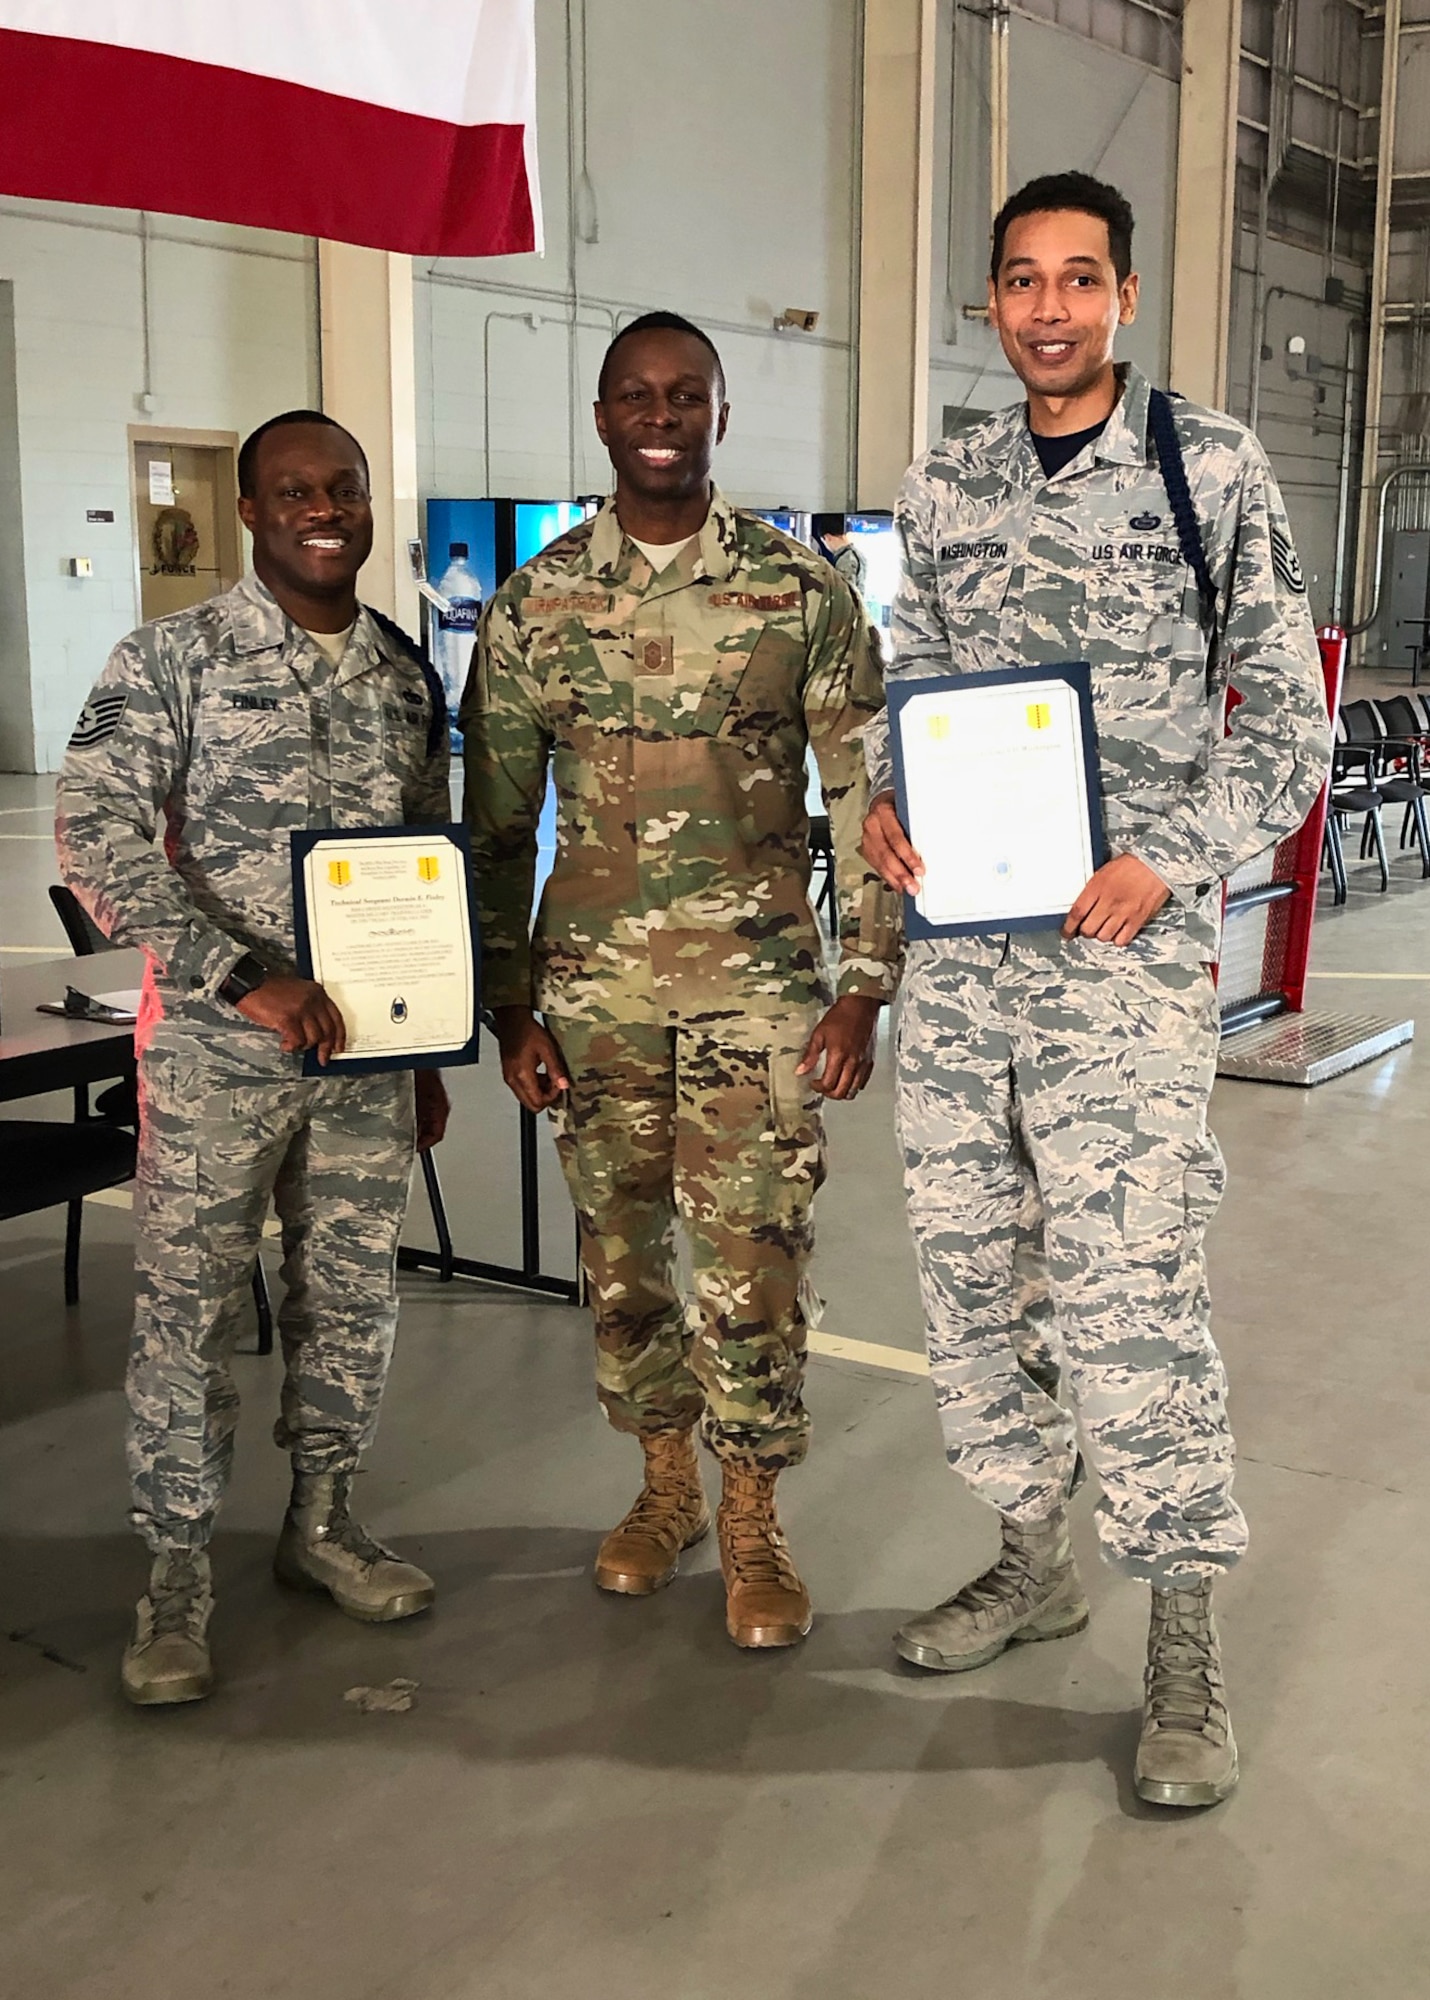 U.S. Air Force Tech. Sgt. Derwin Finley, 312th Training Squadron assistant flight chief and master military training leader, Chief Master Sgt. Lavor Kirkpatrick, 17th Training Wing command chief and Tech. Sgt. Joseph Washington, 315th Training Squadron assistant flight chief and master MTL pose for a congratulatory photo in the Louis F. Garland Department of Defense Fire Academy High Bay on Goodfellow Air Force Base, Texas, Feb. 7, 2020.  Finley and Washington became the first Master Military Training Leaders in the Air Education and Training Command. (Courtesy photo)